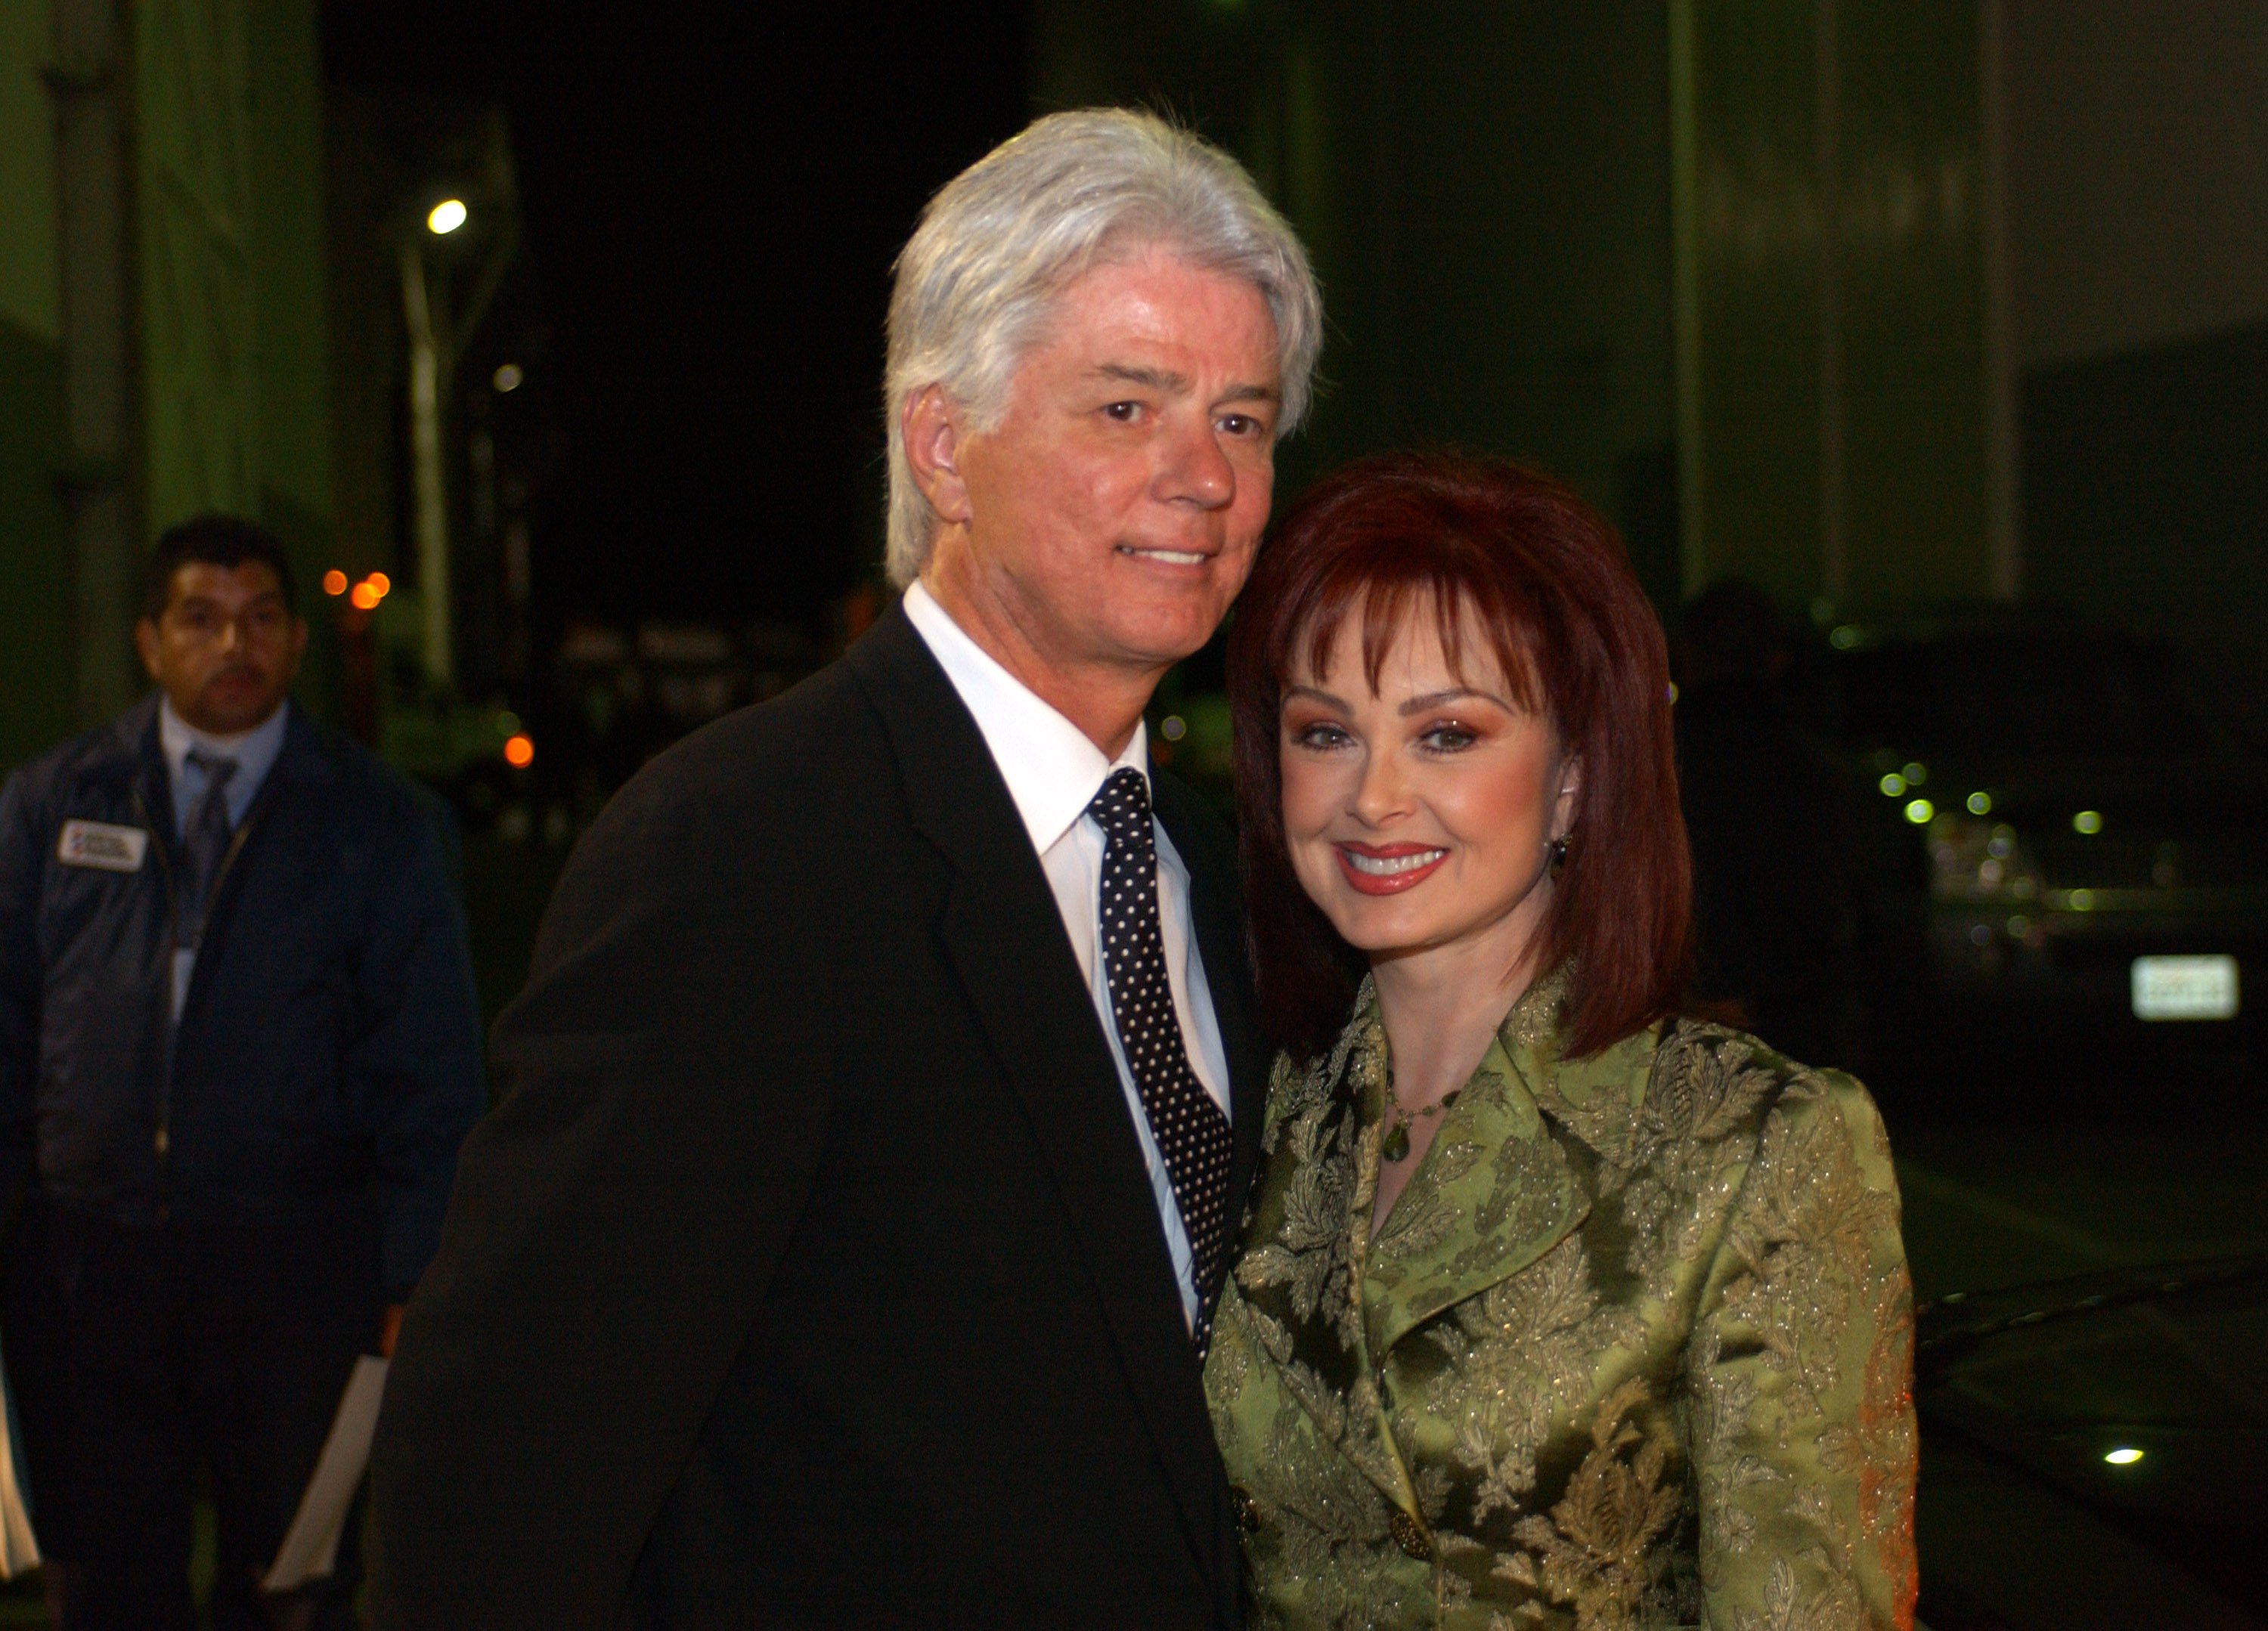 Larry Strickland and Naomi Judd at the 46th Annual Grammy Awards on February 6, 2004. | Source: R. Diamond/WireImage/Getty Images